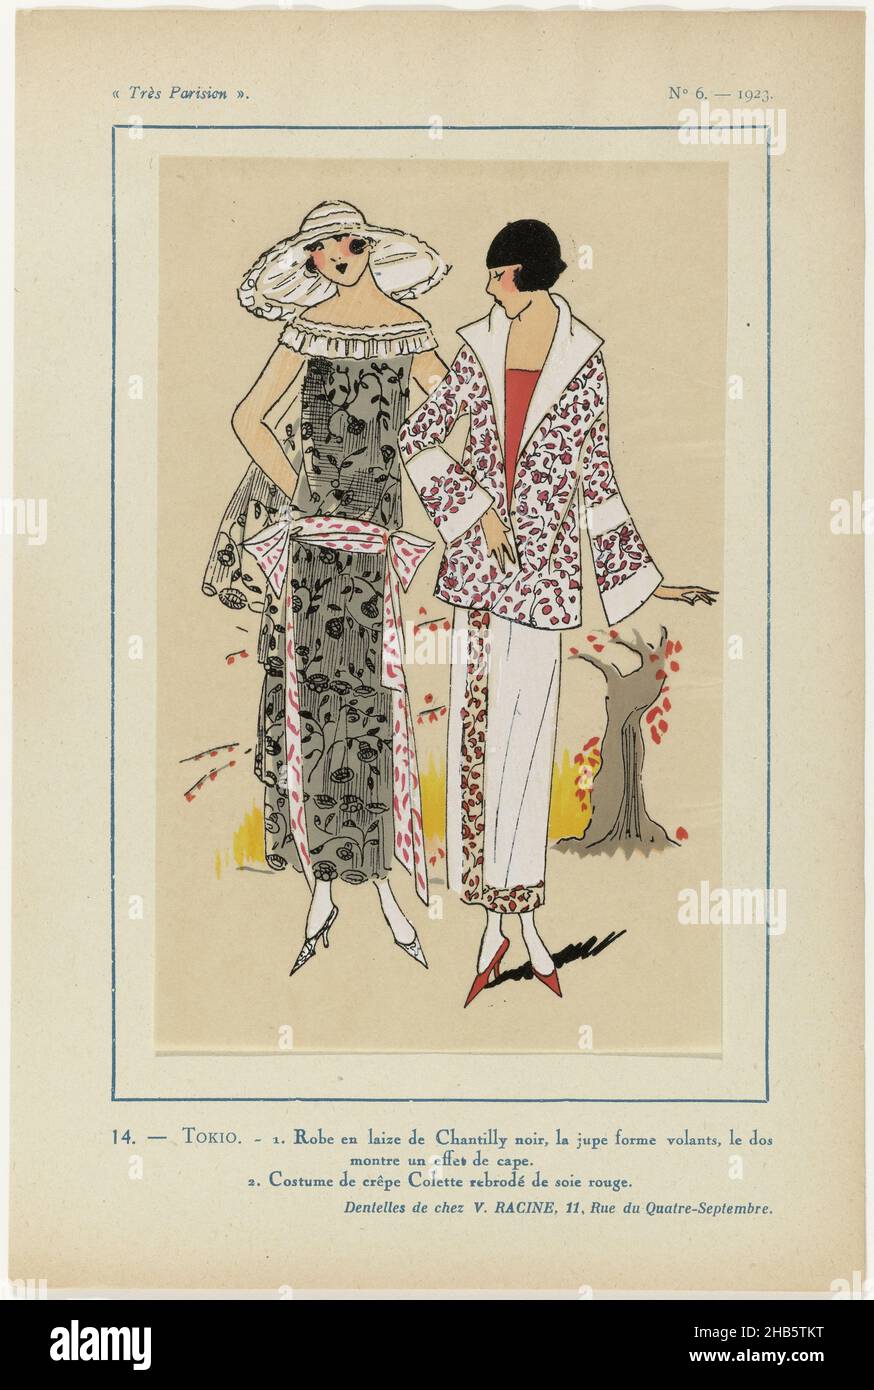 Très Parisien, 1923, No 6: 14. - TOKIO. - 1. Robe en laize de Chantilly..., 1. Dress of black 'laize de Chantilly' (lace); the skirt consists of flounces, the back appears to have a cape. 2. Costume (suit) of crepe Colette embroidered with red silk. Lace by V. Racine. Print from the fashion magazine Très Parisien (1920-1936)., print maker: anonymous, V. Racine (mentioned on object), Paris, 1923, paper, letterpress printing, height 269 mm × width 180 mm Stock Photo